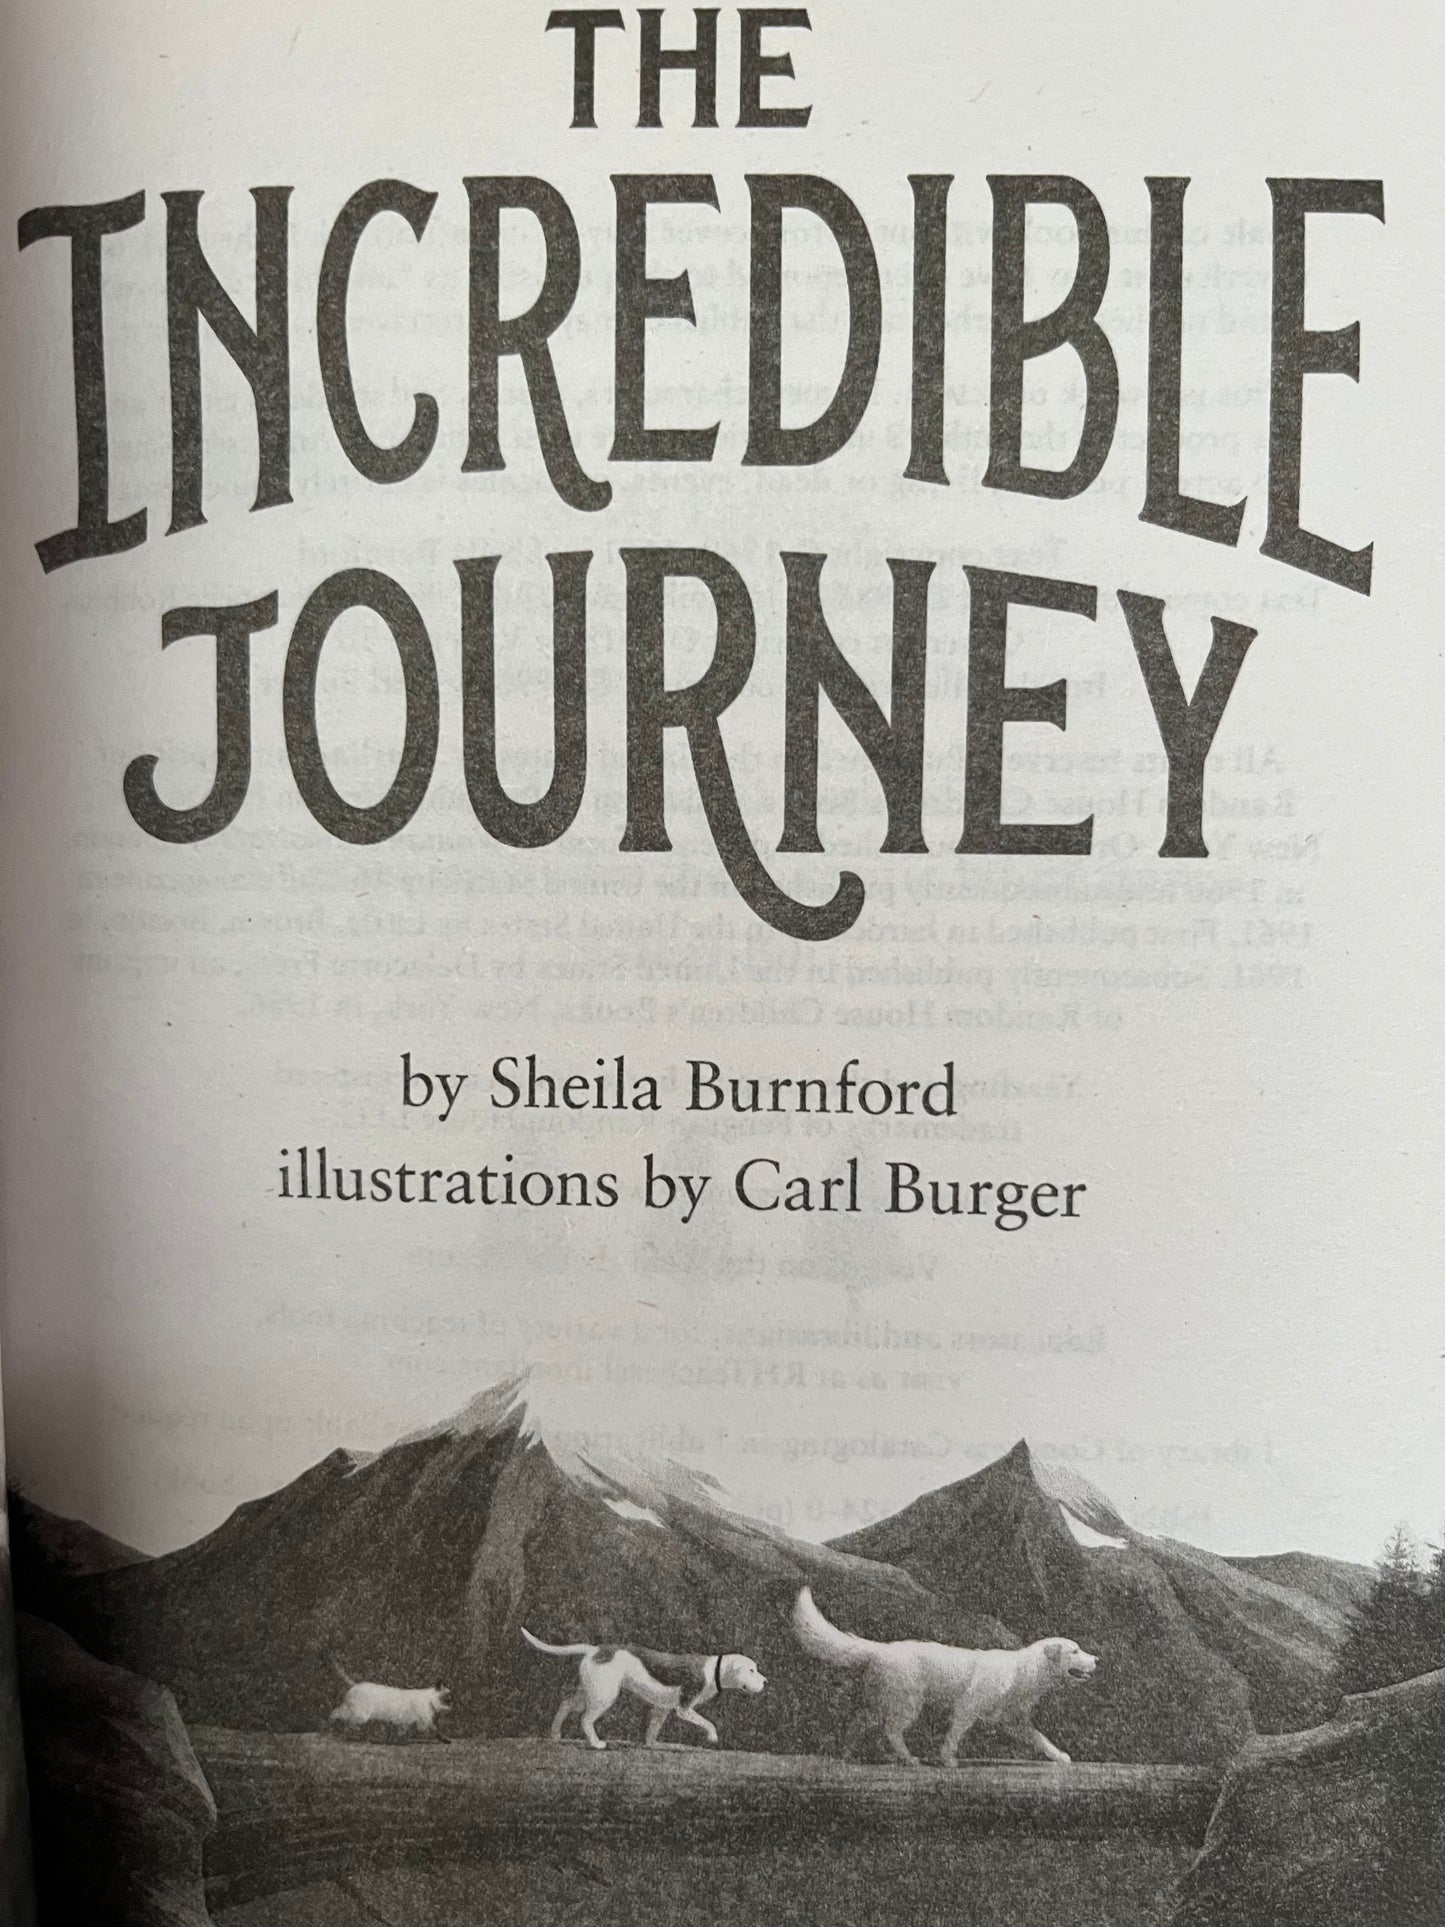 Chapter Books for Older Readers - THE INCREDIBLE JOURNEY